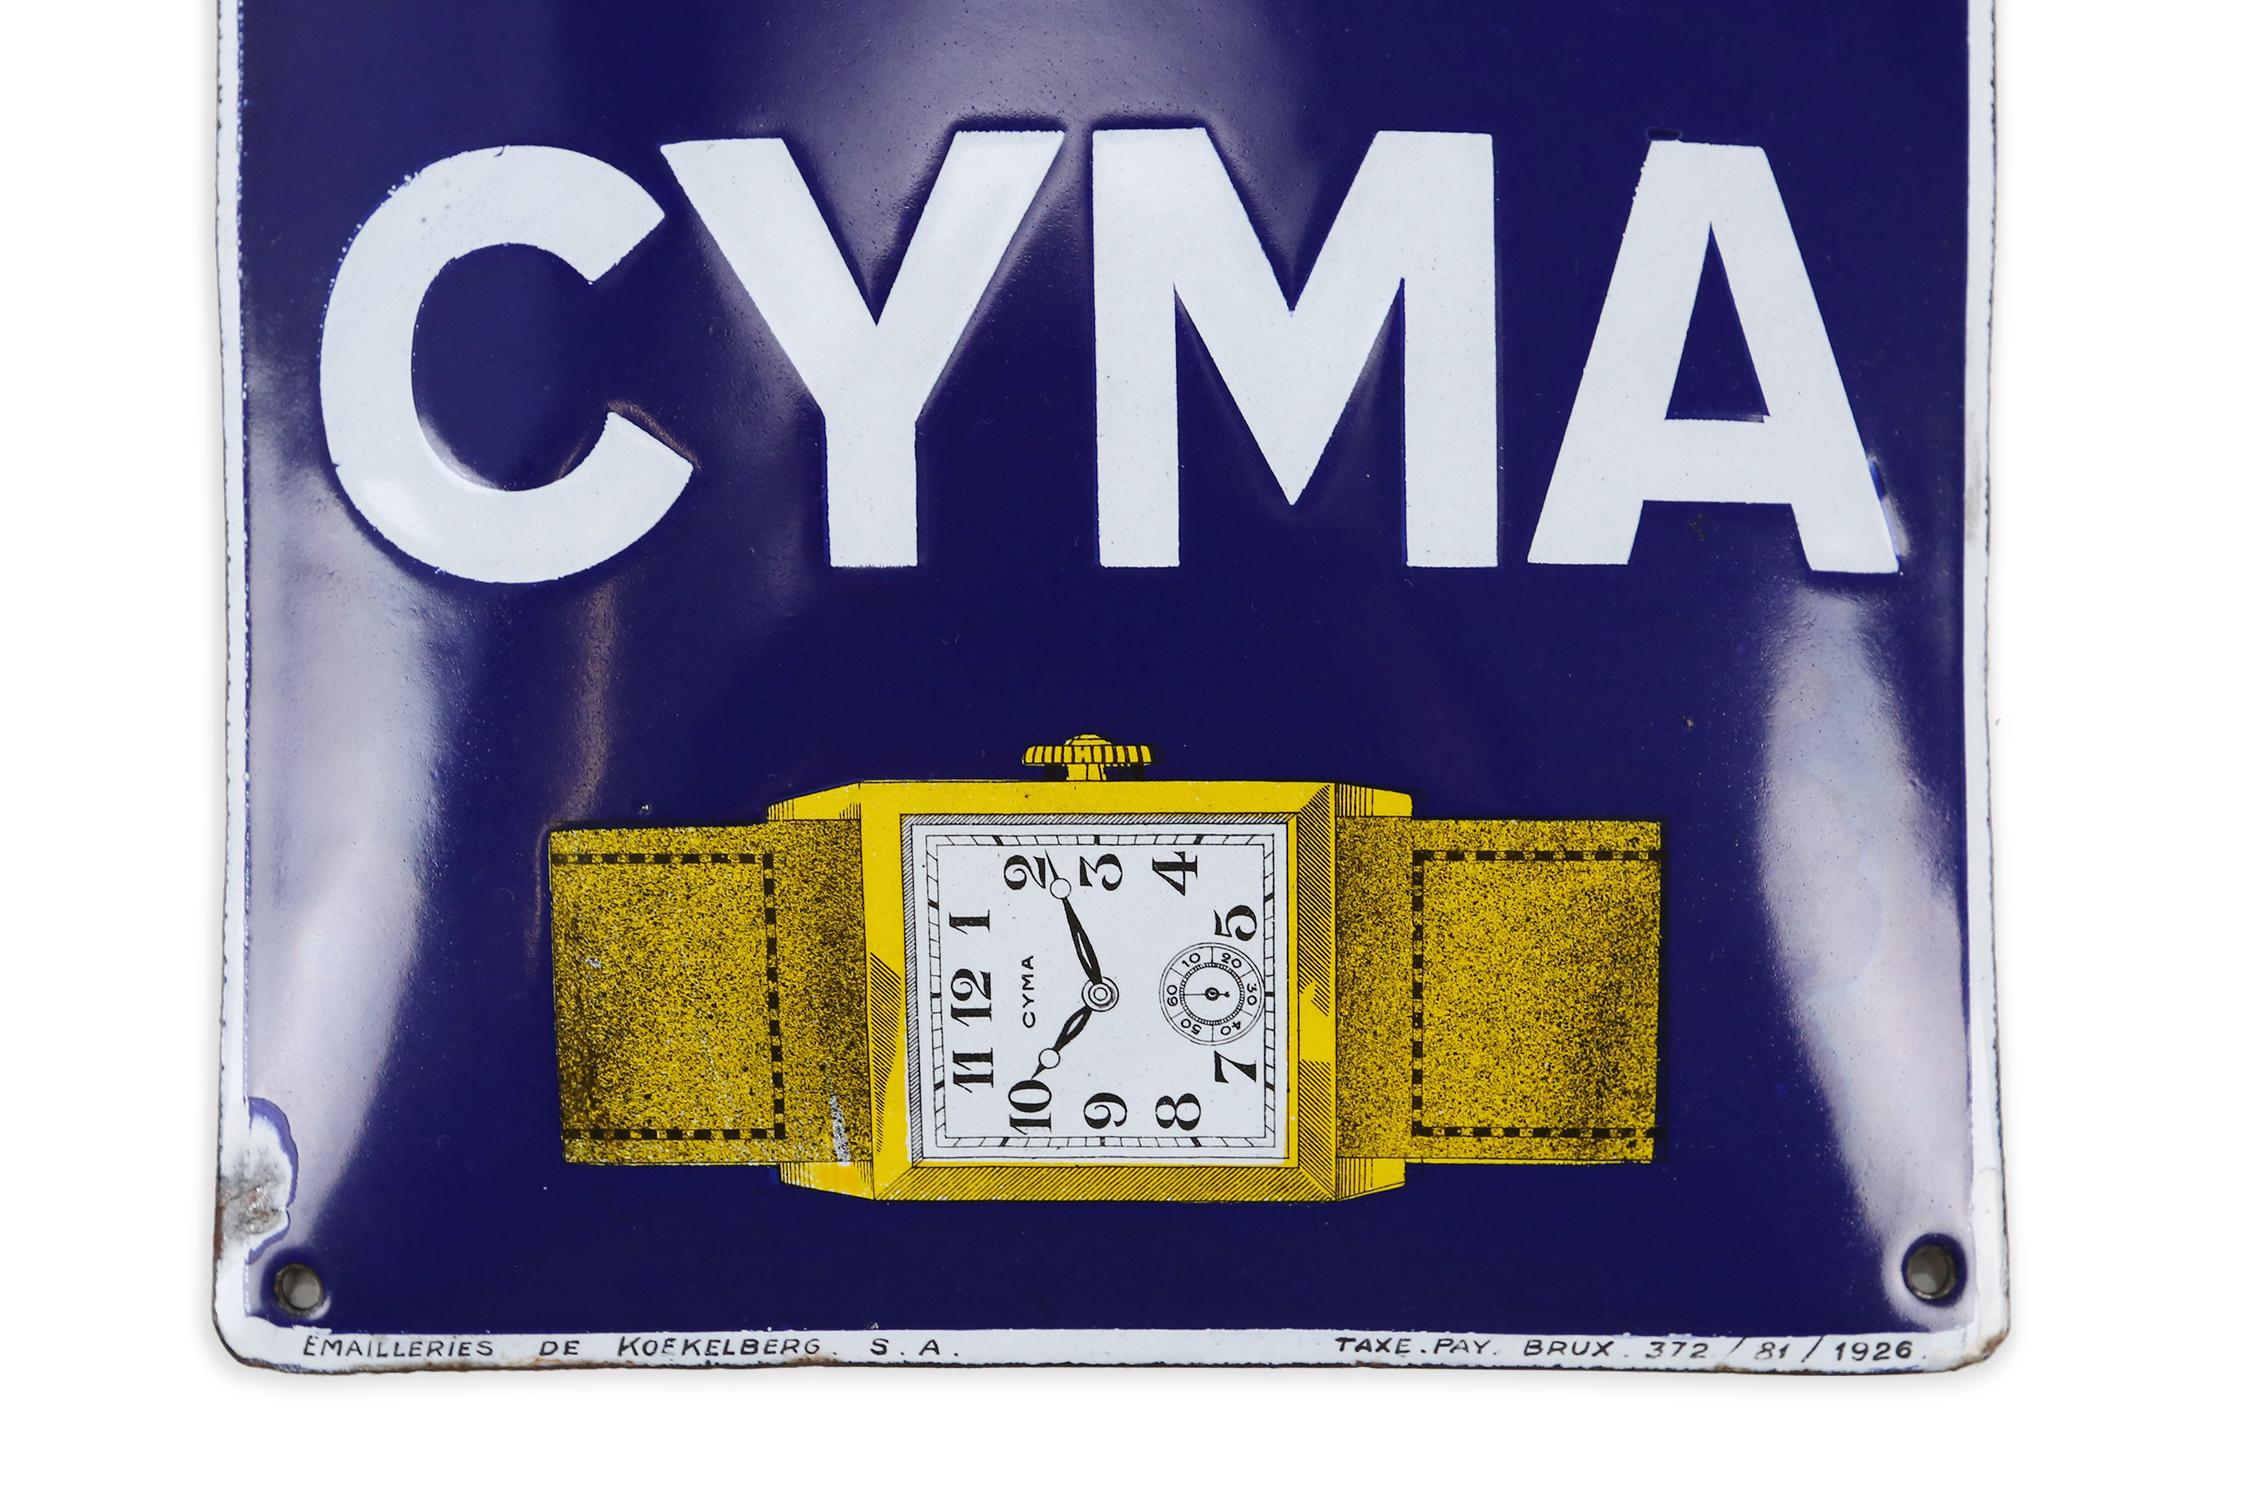 Enamel advertising sign of the Watch brand Cyma.
Made and dated in 1926.
In a great condition and colors seen the age.